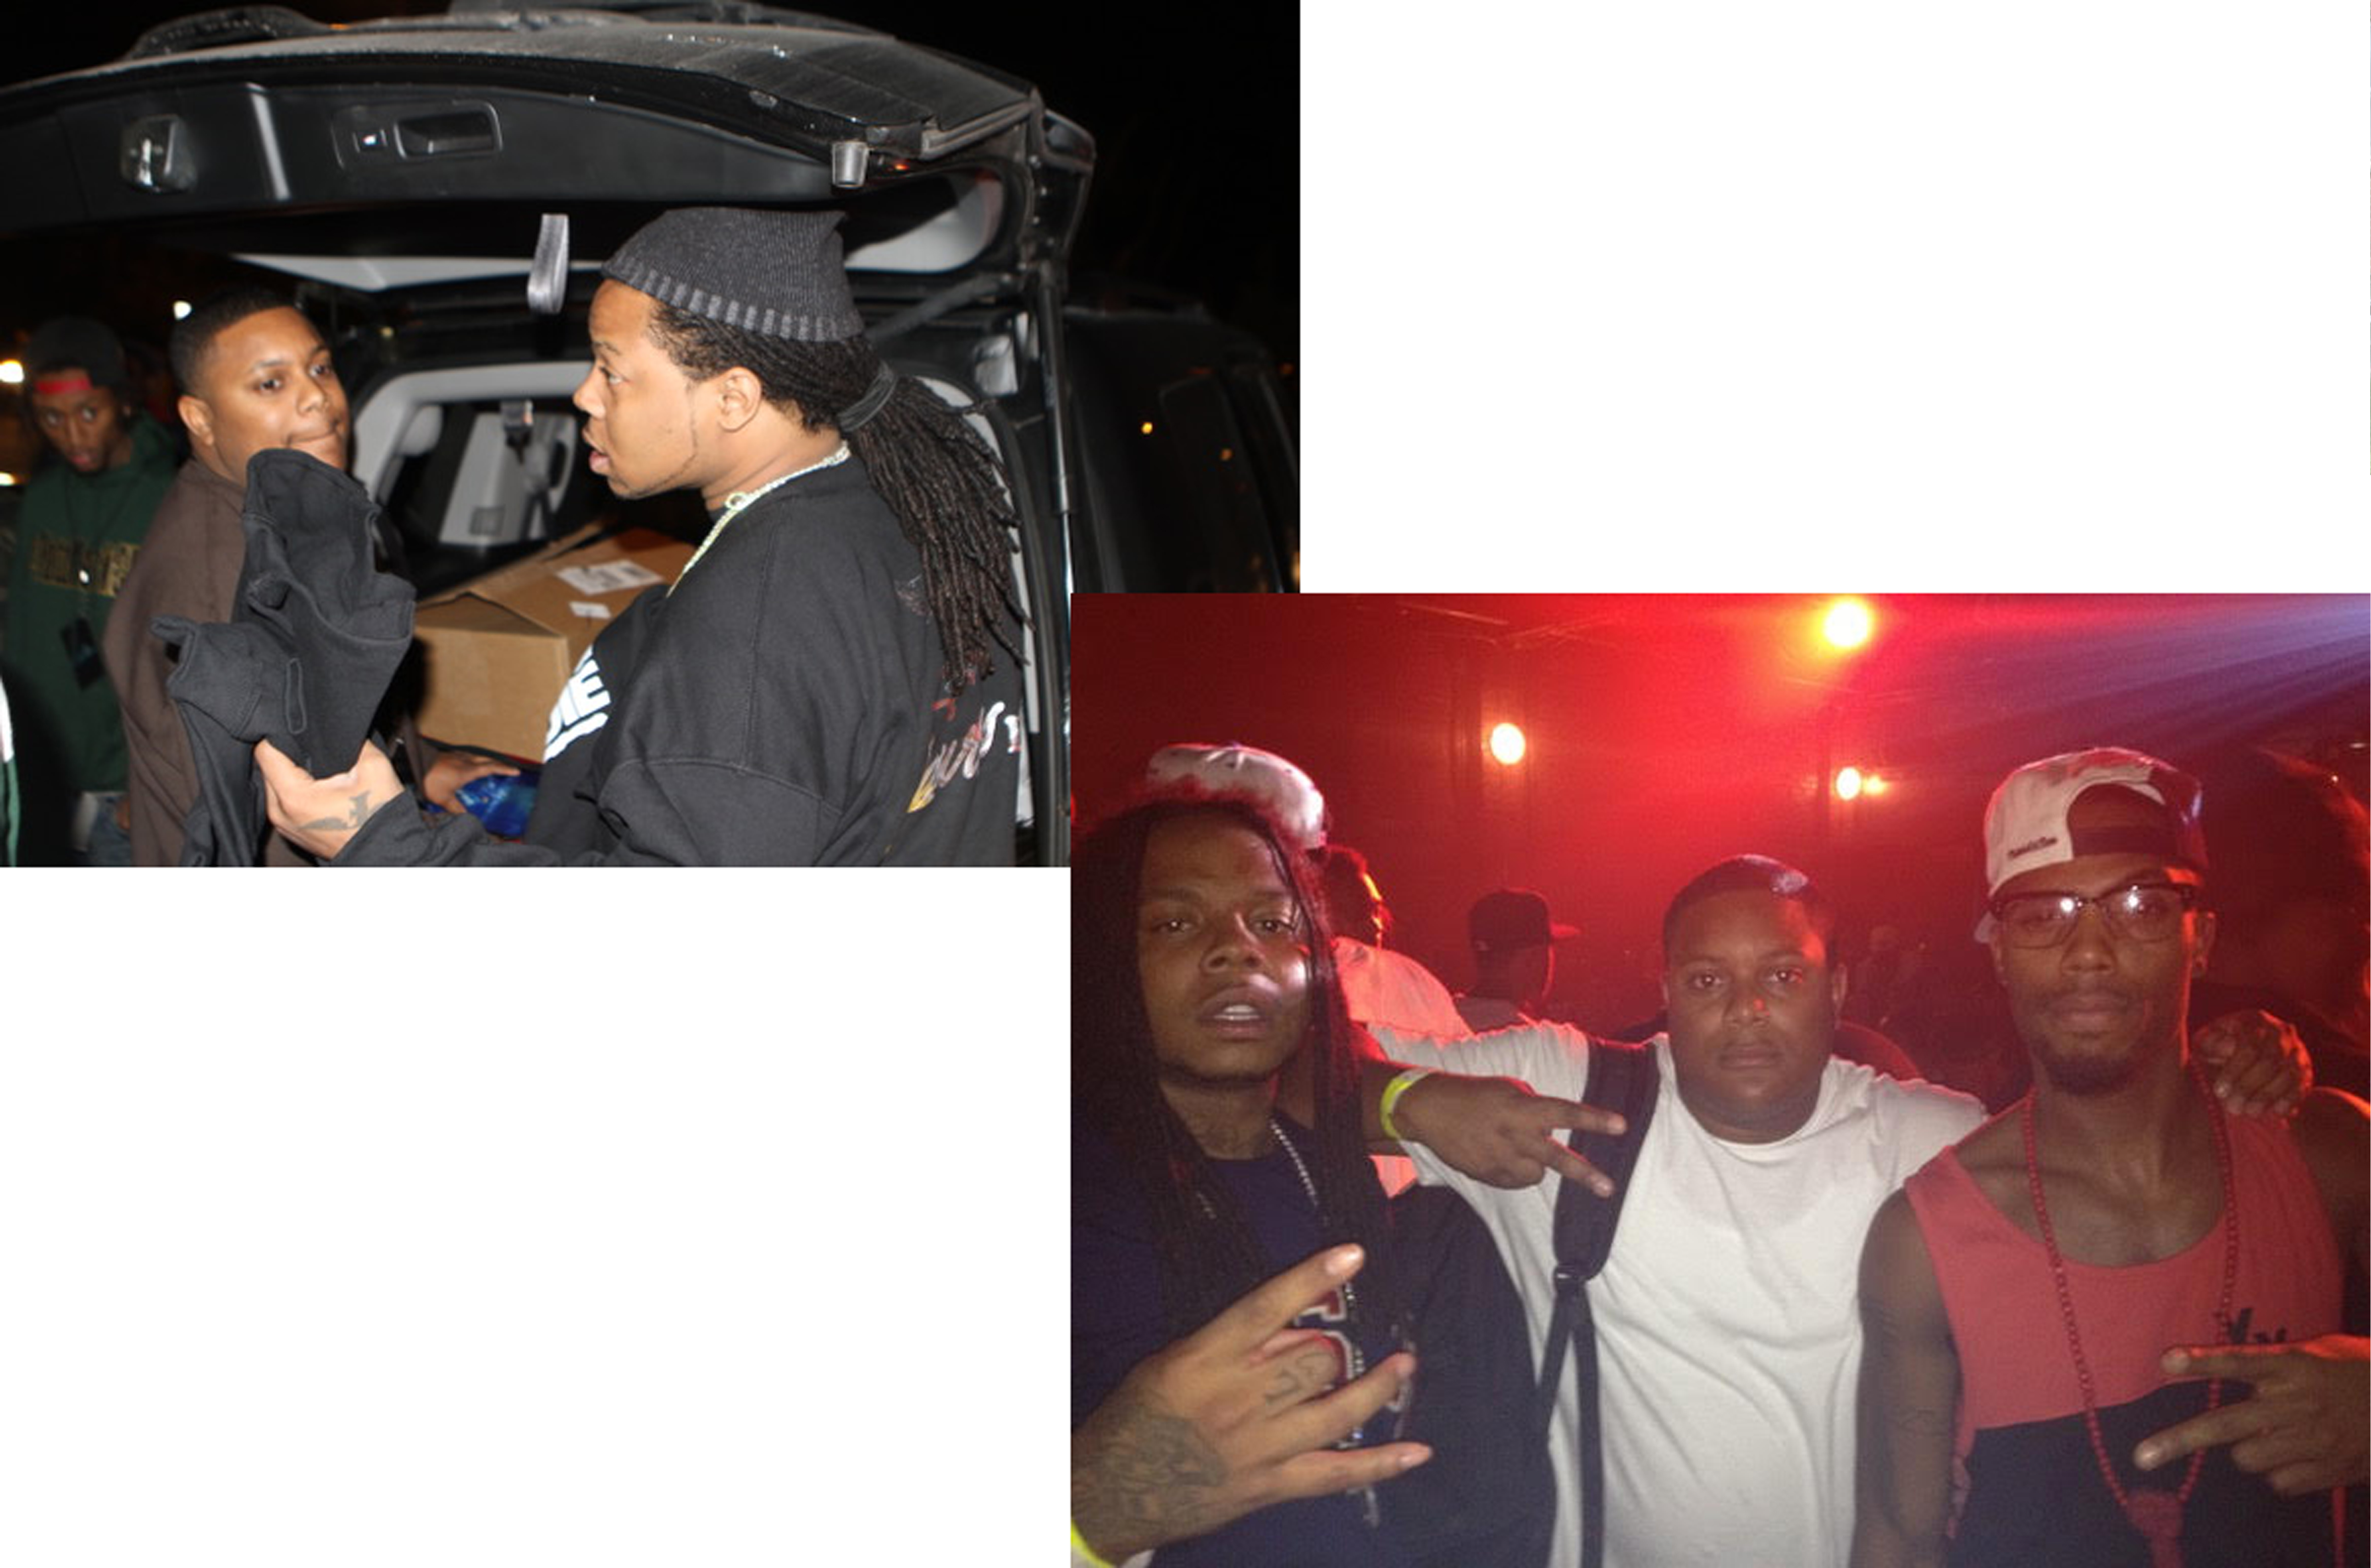 Larro Wilson and King Louie selling shirts from their car, both of them at the club.